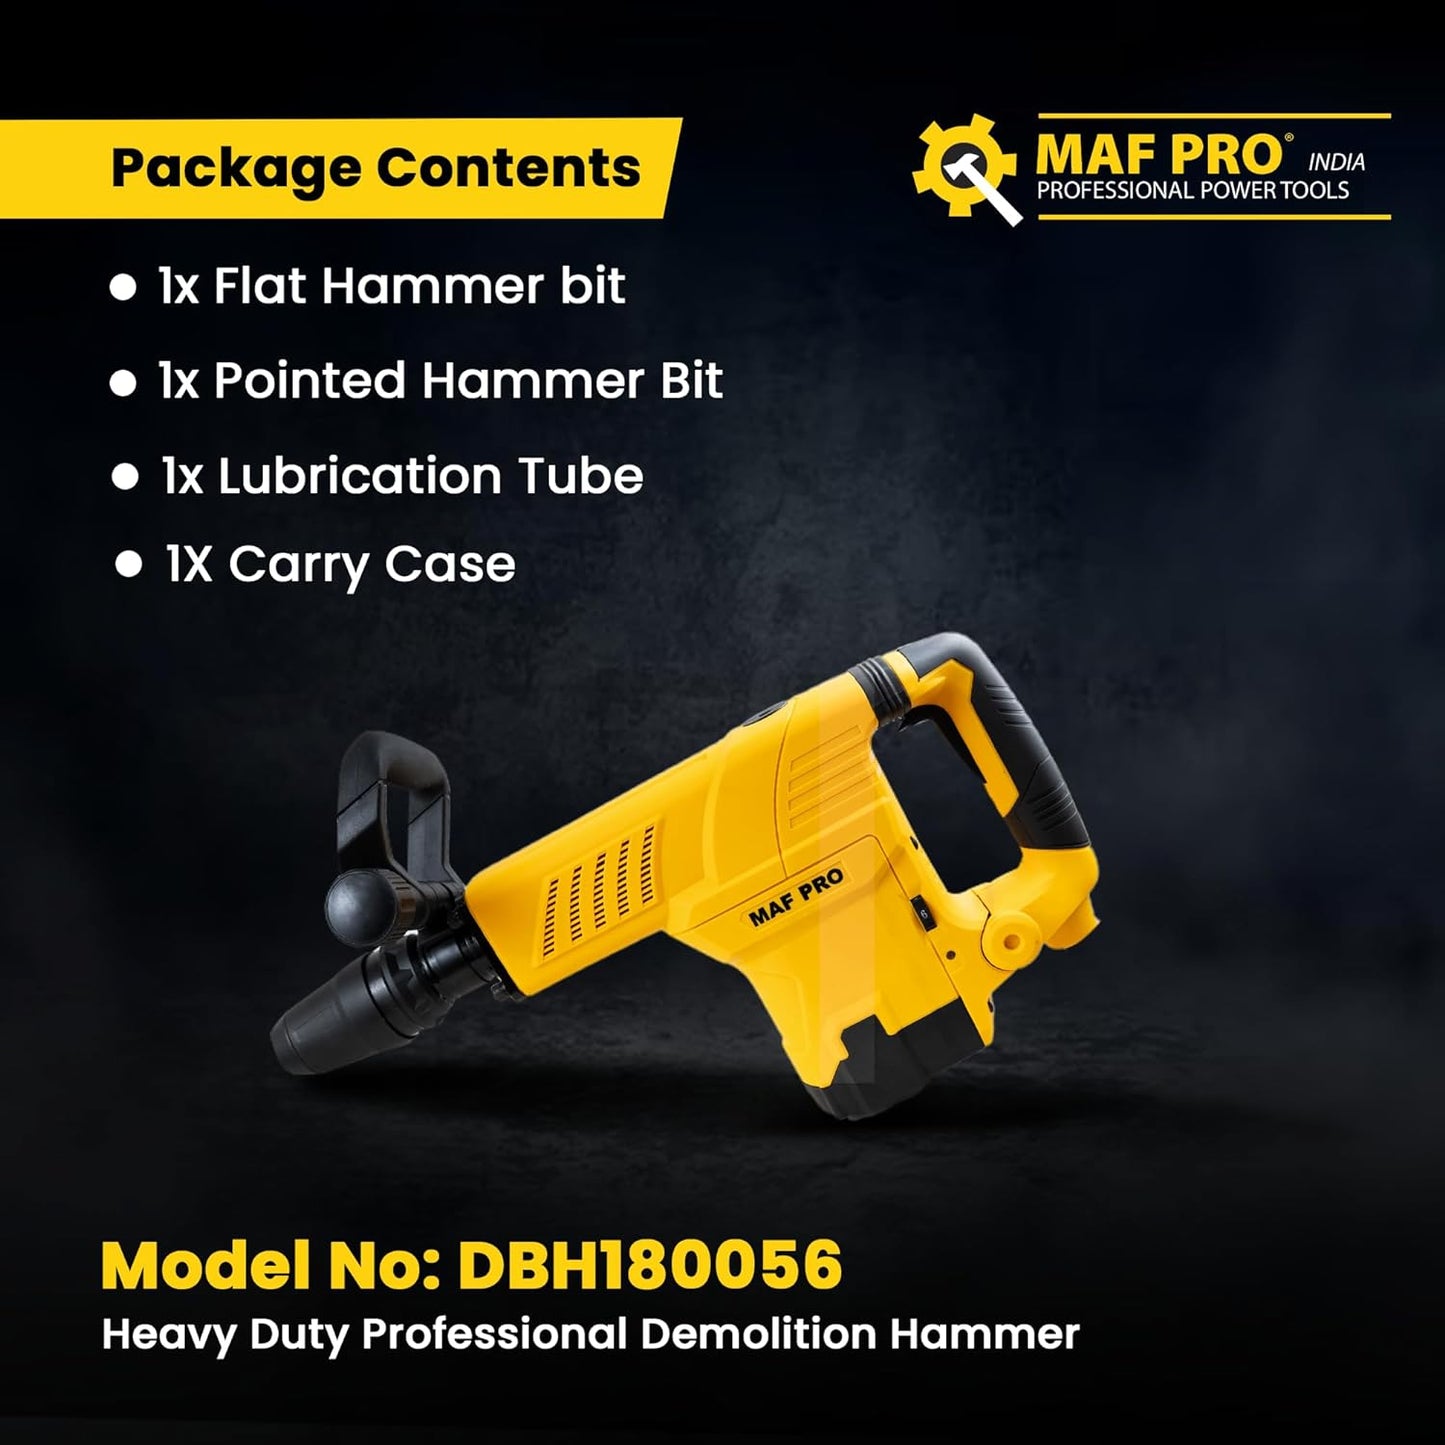 MAF PRO DBH180056 11kg Heavy Duty Professional Breaker/Demolition Hammer/Concrete Breaker with Pointed and Flat Chisel Bits For Chipping/Demolition (1800W, 0-27J, 0-2000bpm)